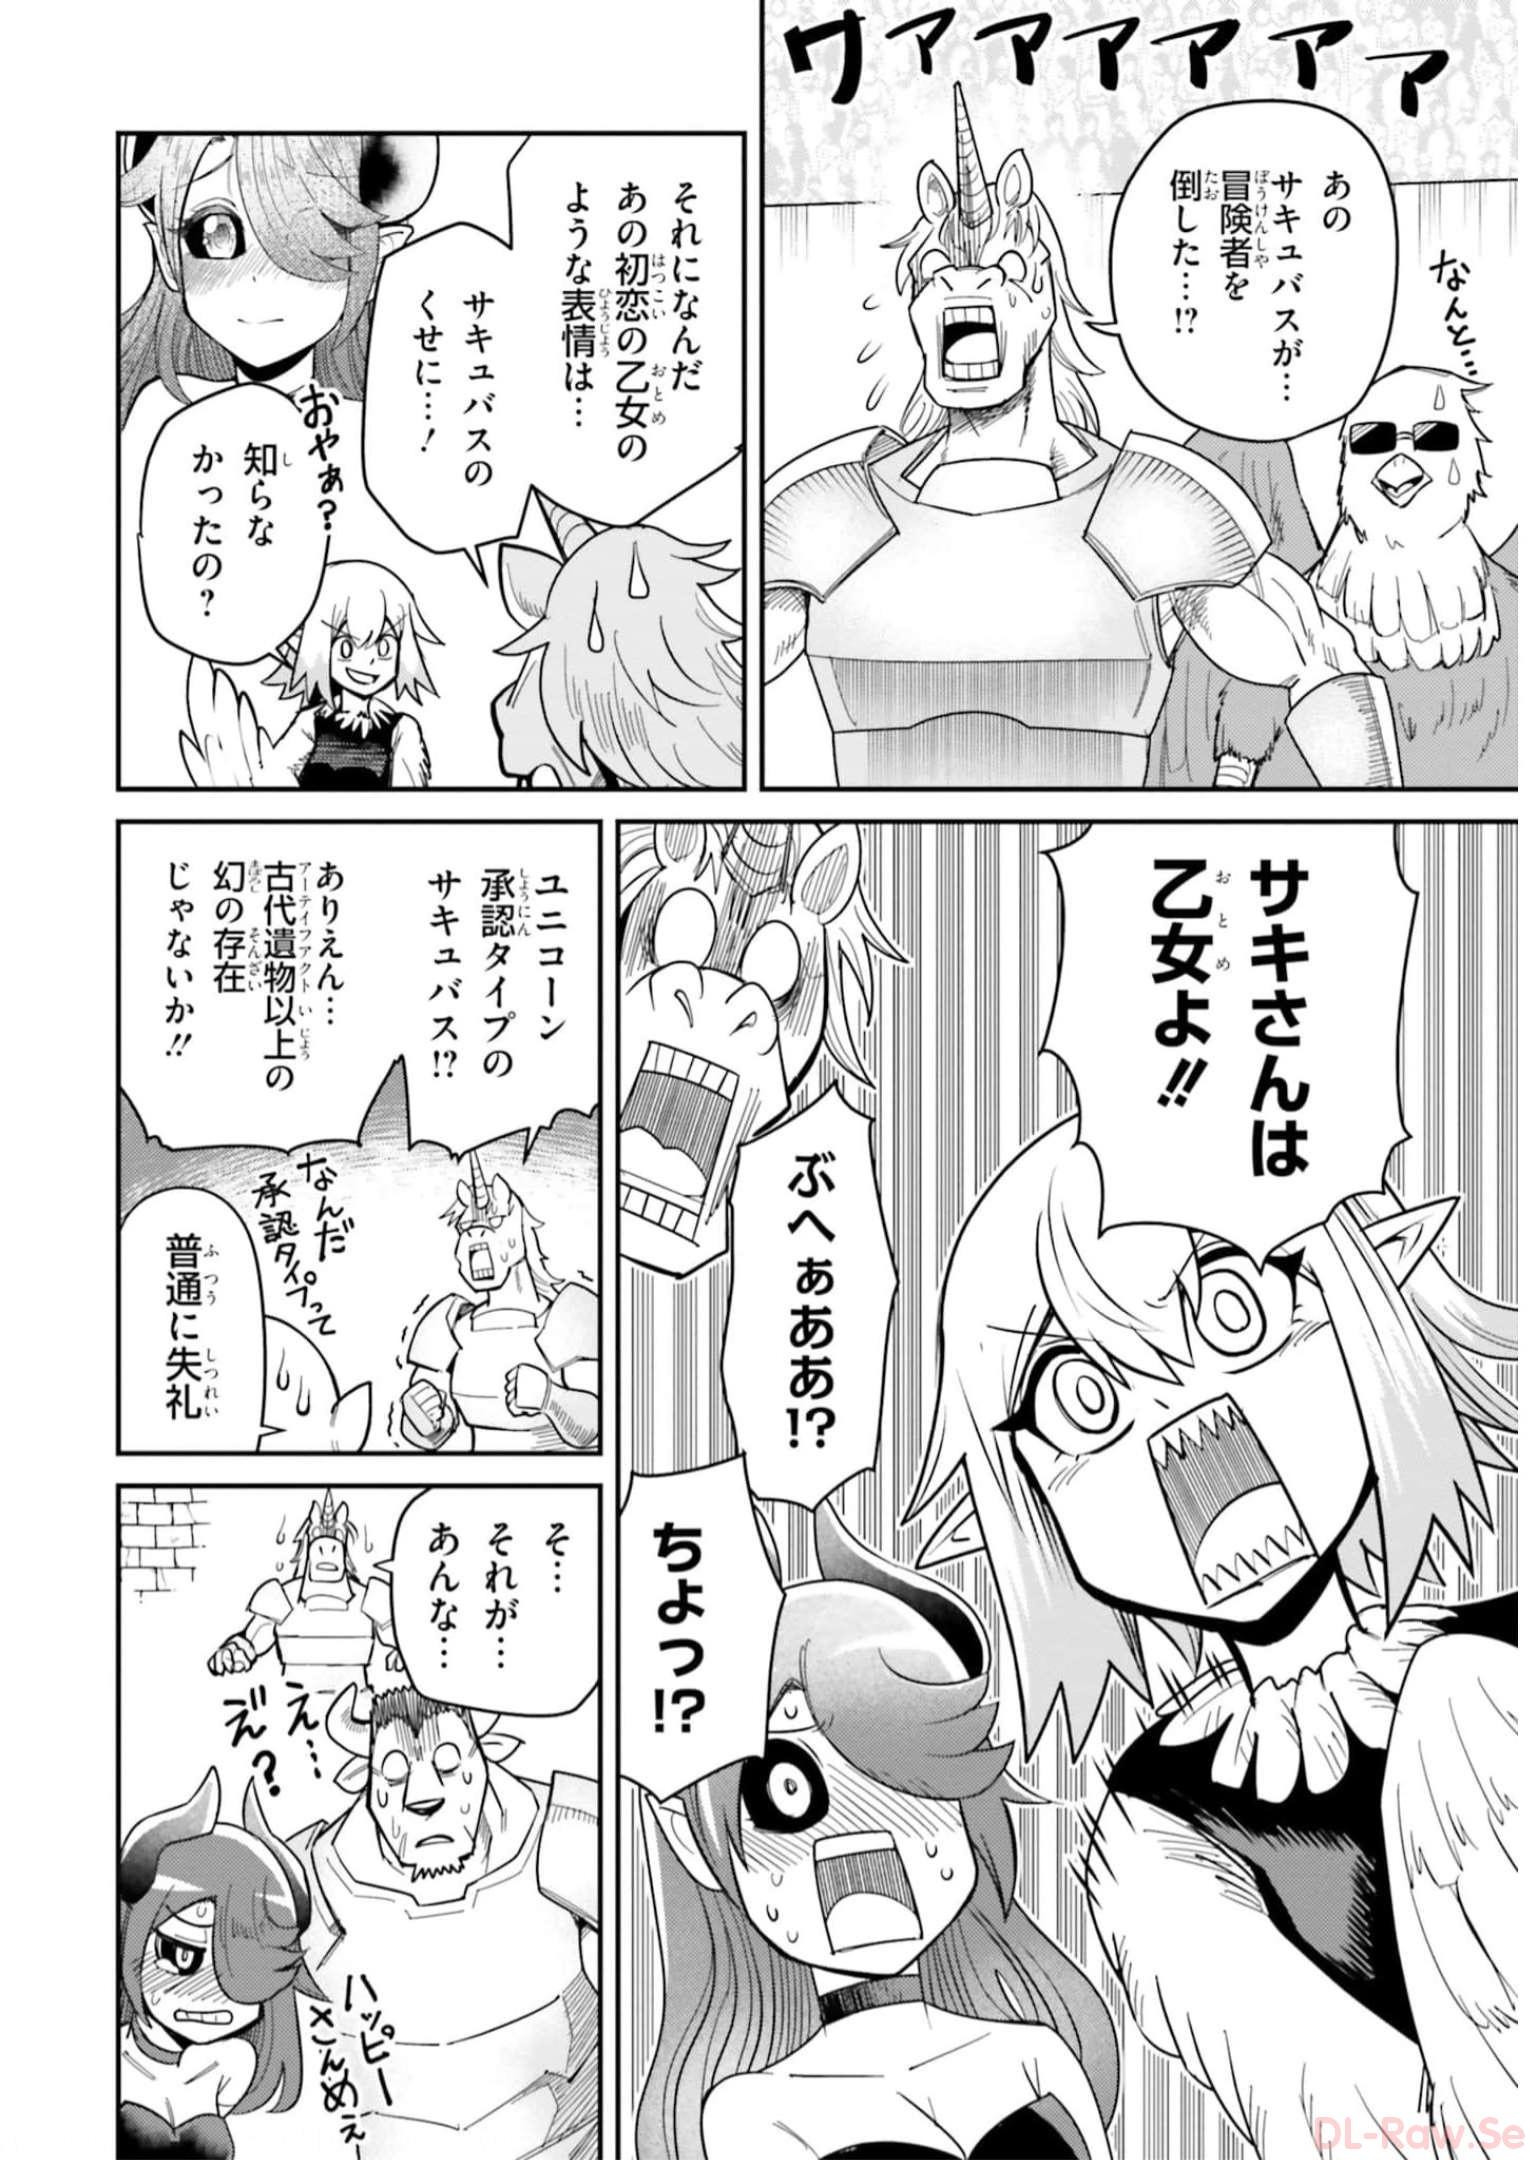 Dungeon Friends Forever Dungeon's Childhood Friend ダンジョンの幼なじみ 第20話 - Page 20